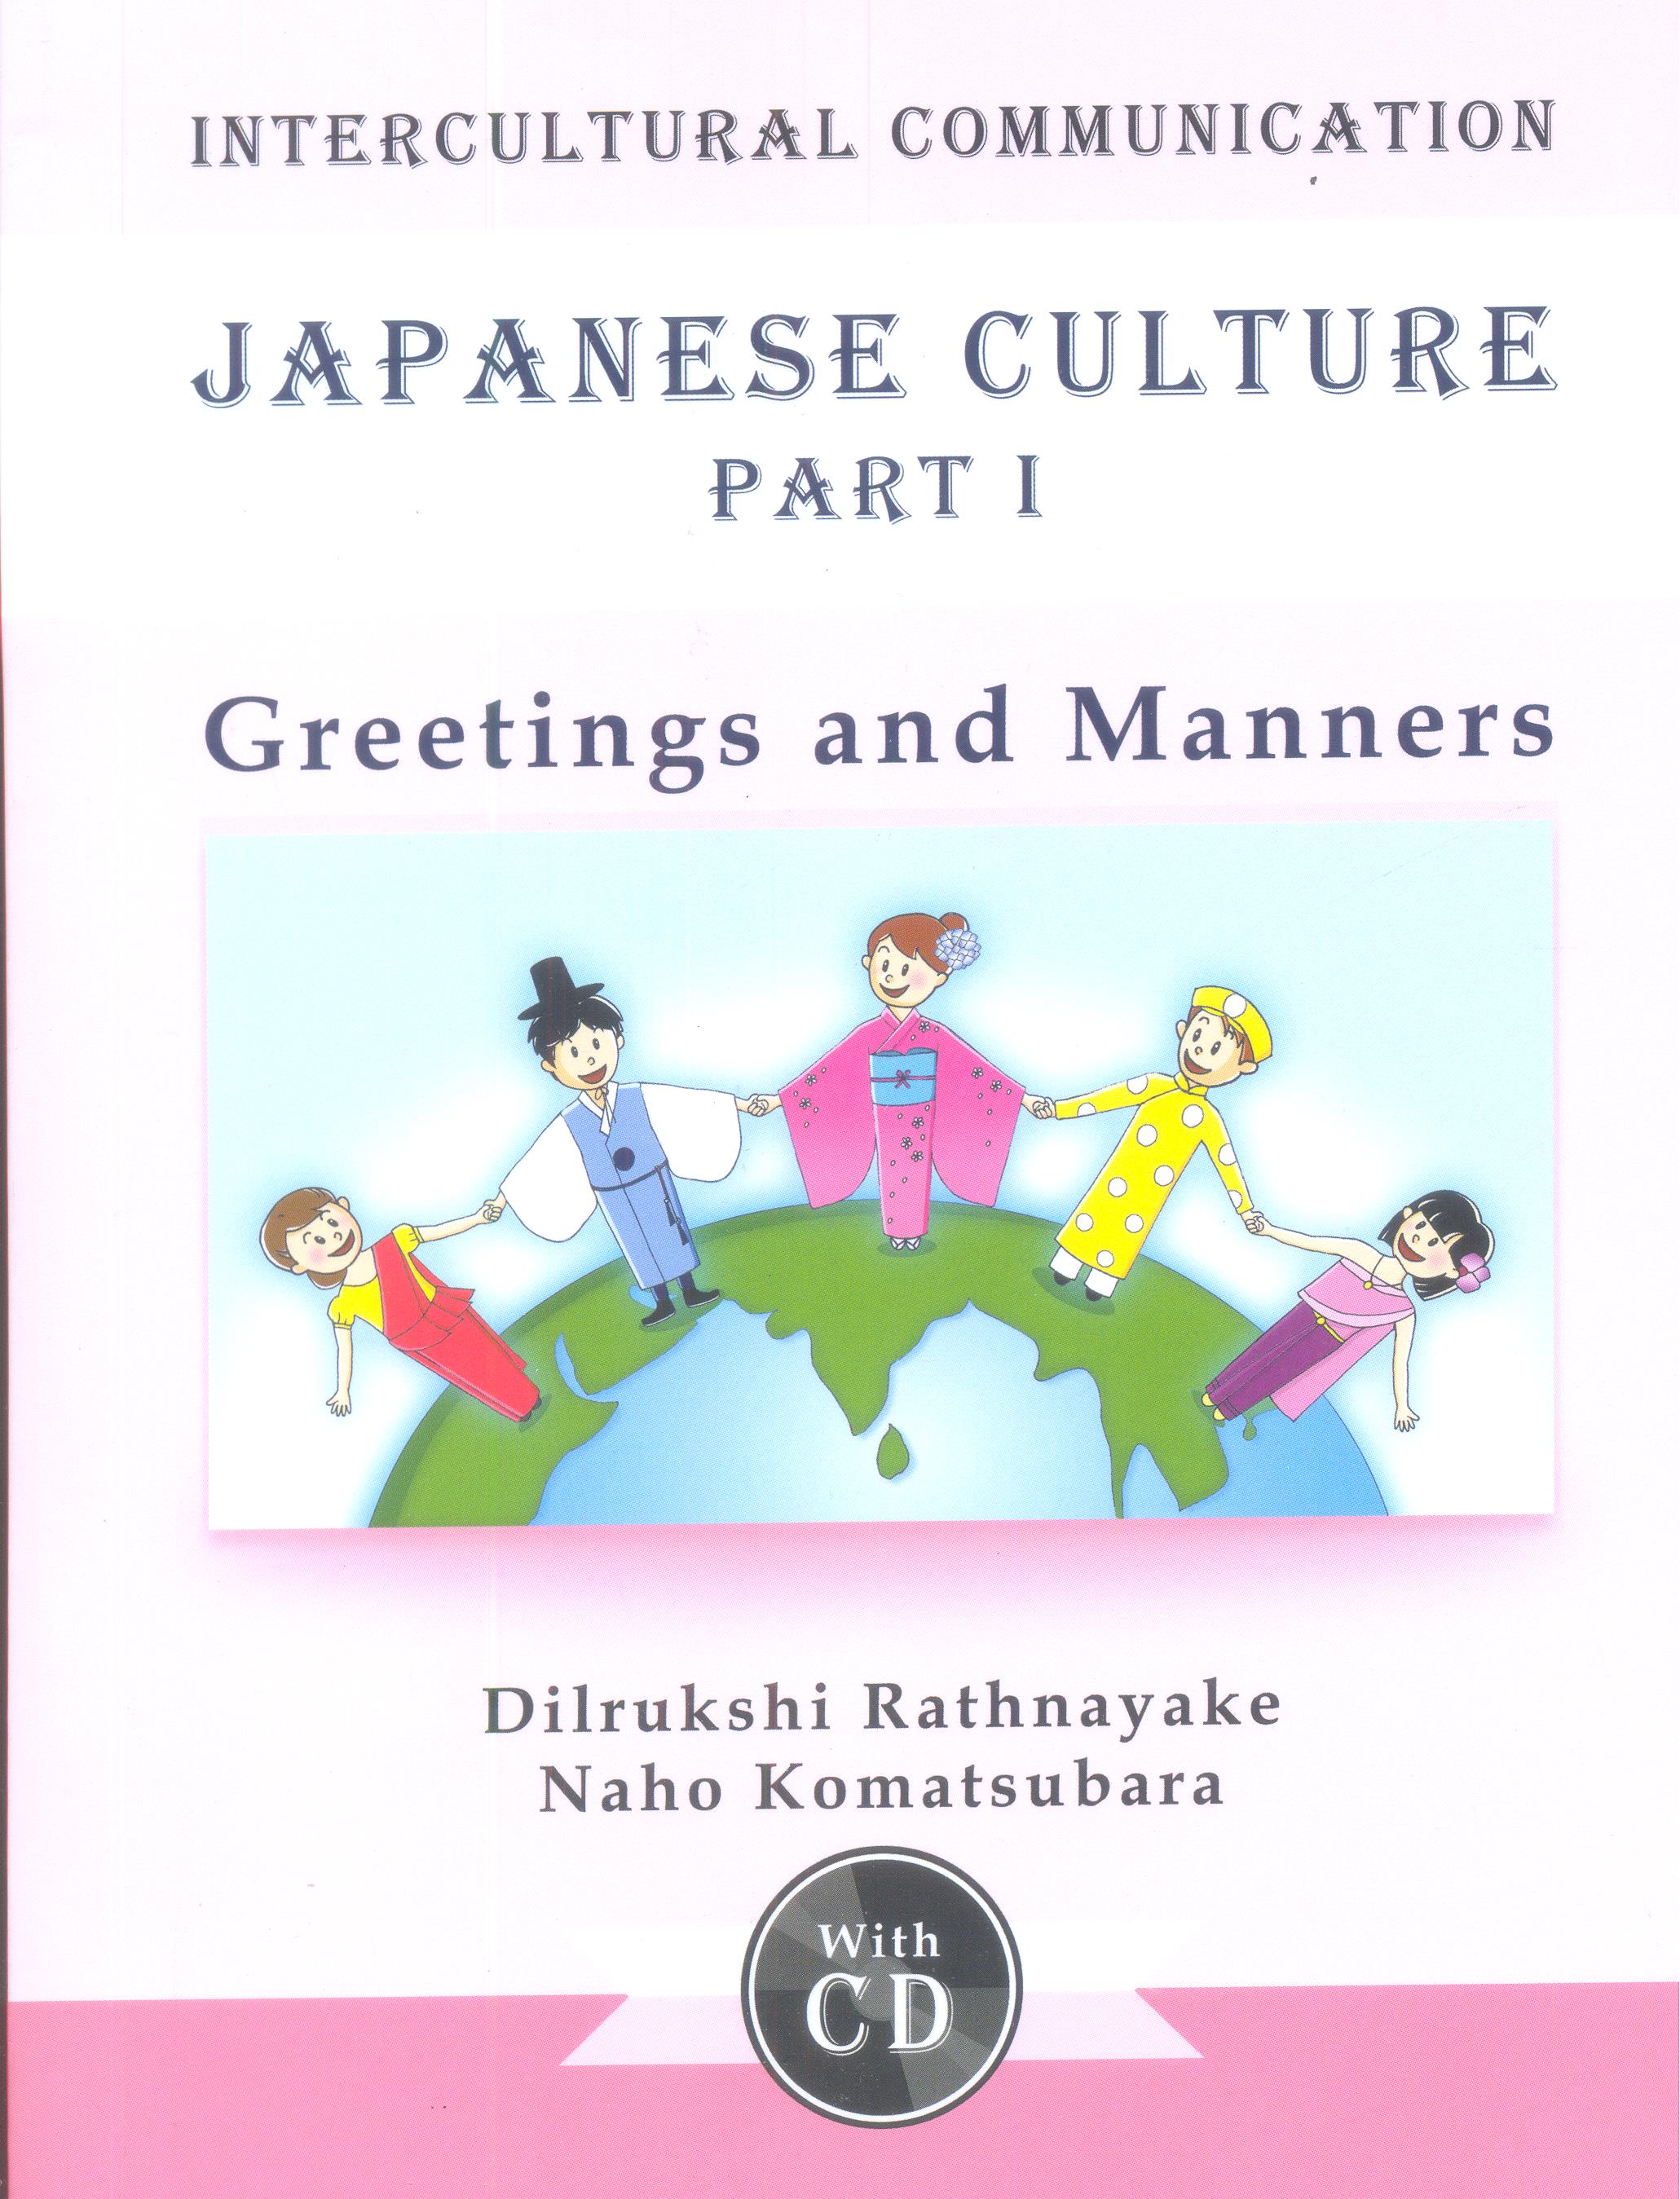 Intercultural Communication Japanese Culture With CD - Part 01 ( Greetings And Manners )